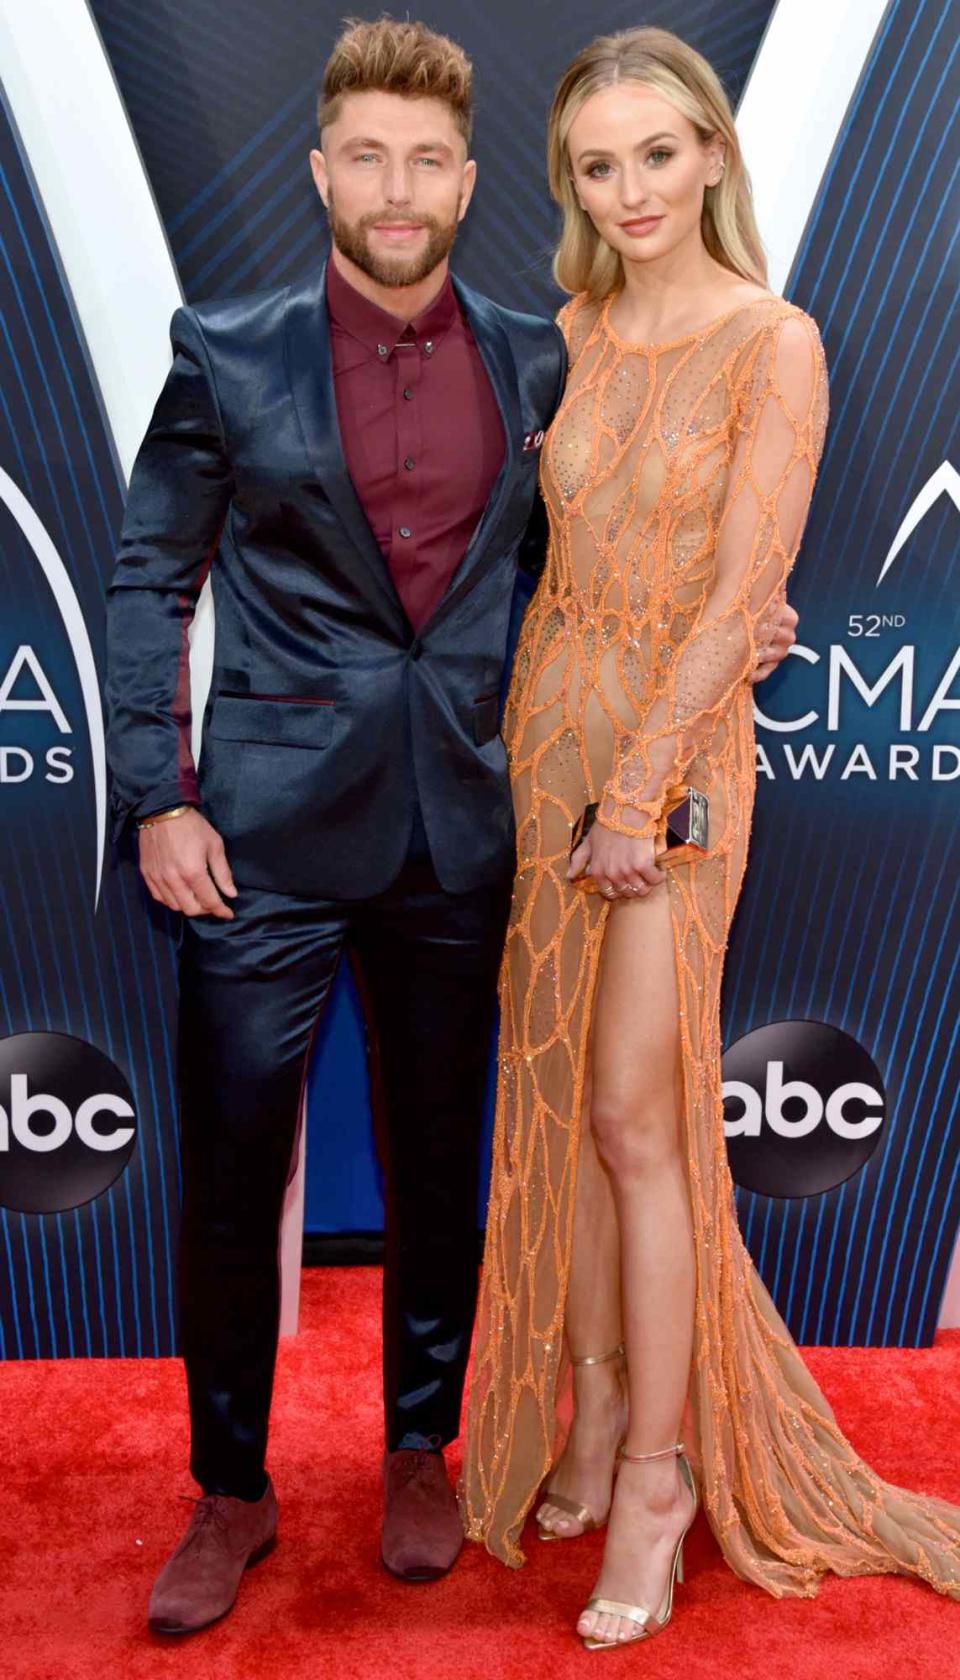 Chris Lane and Lauren Bushnell attend the 52nd annual CMA Awards at the Bridgestone Arena on November 14, 2018 in Nashville, Tennessee